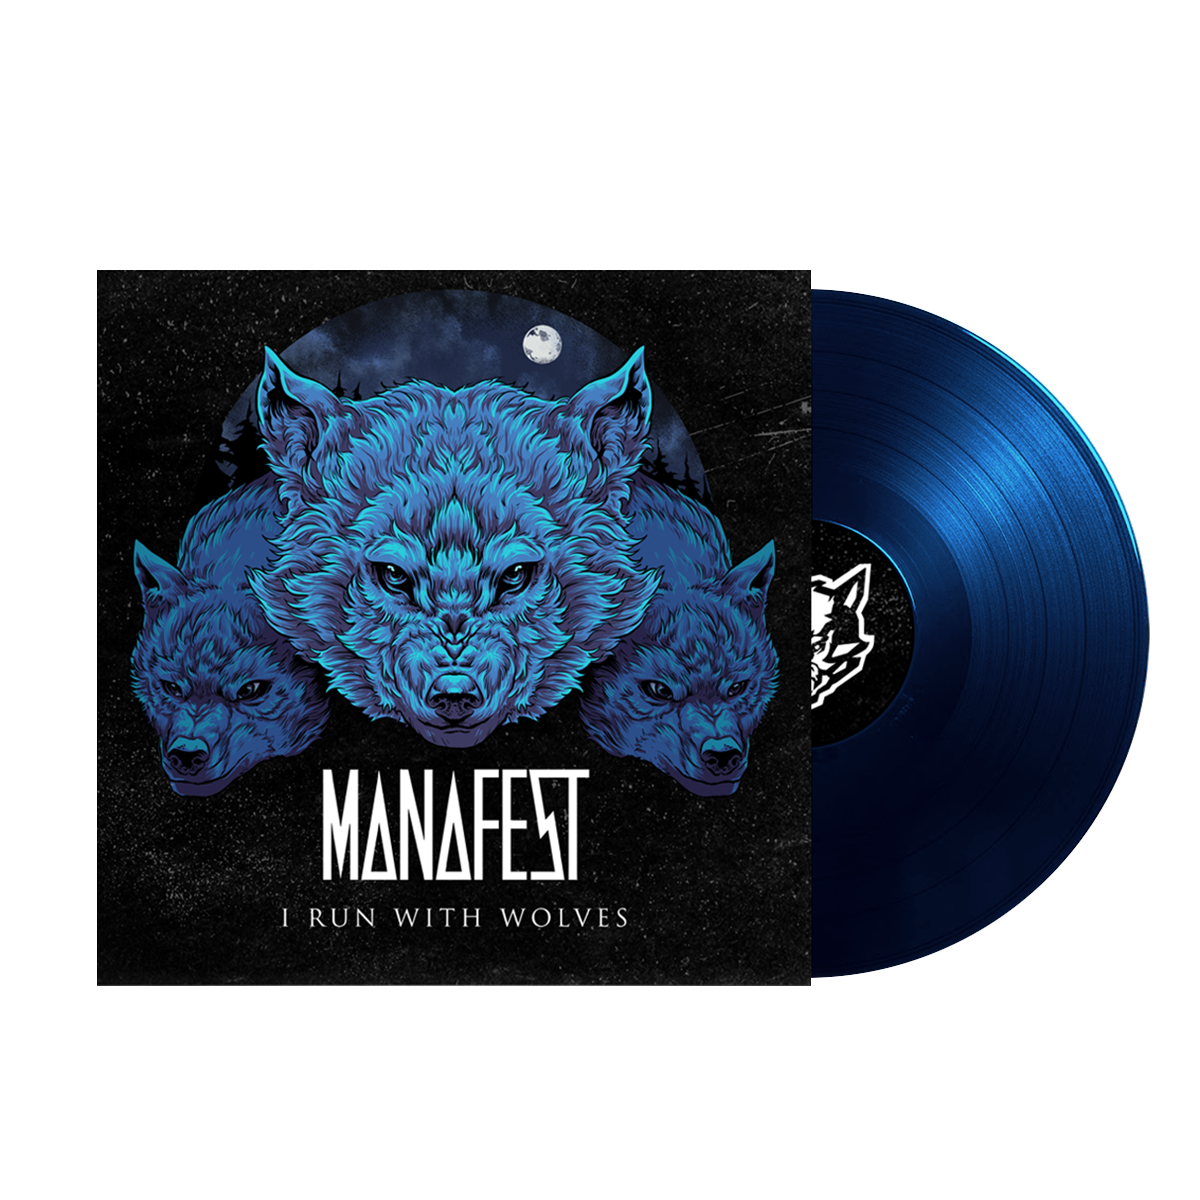 I Run With Wolves Limited Edition Vinyl + Digital Album Download